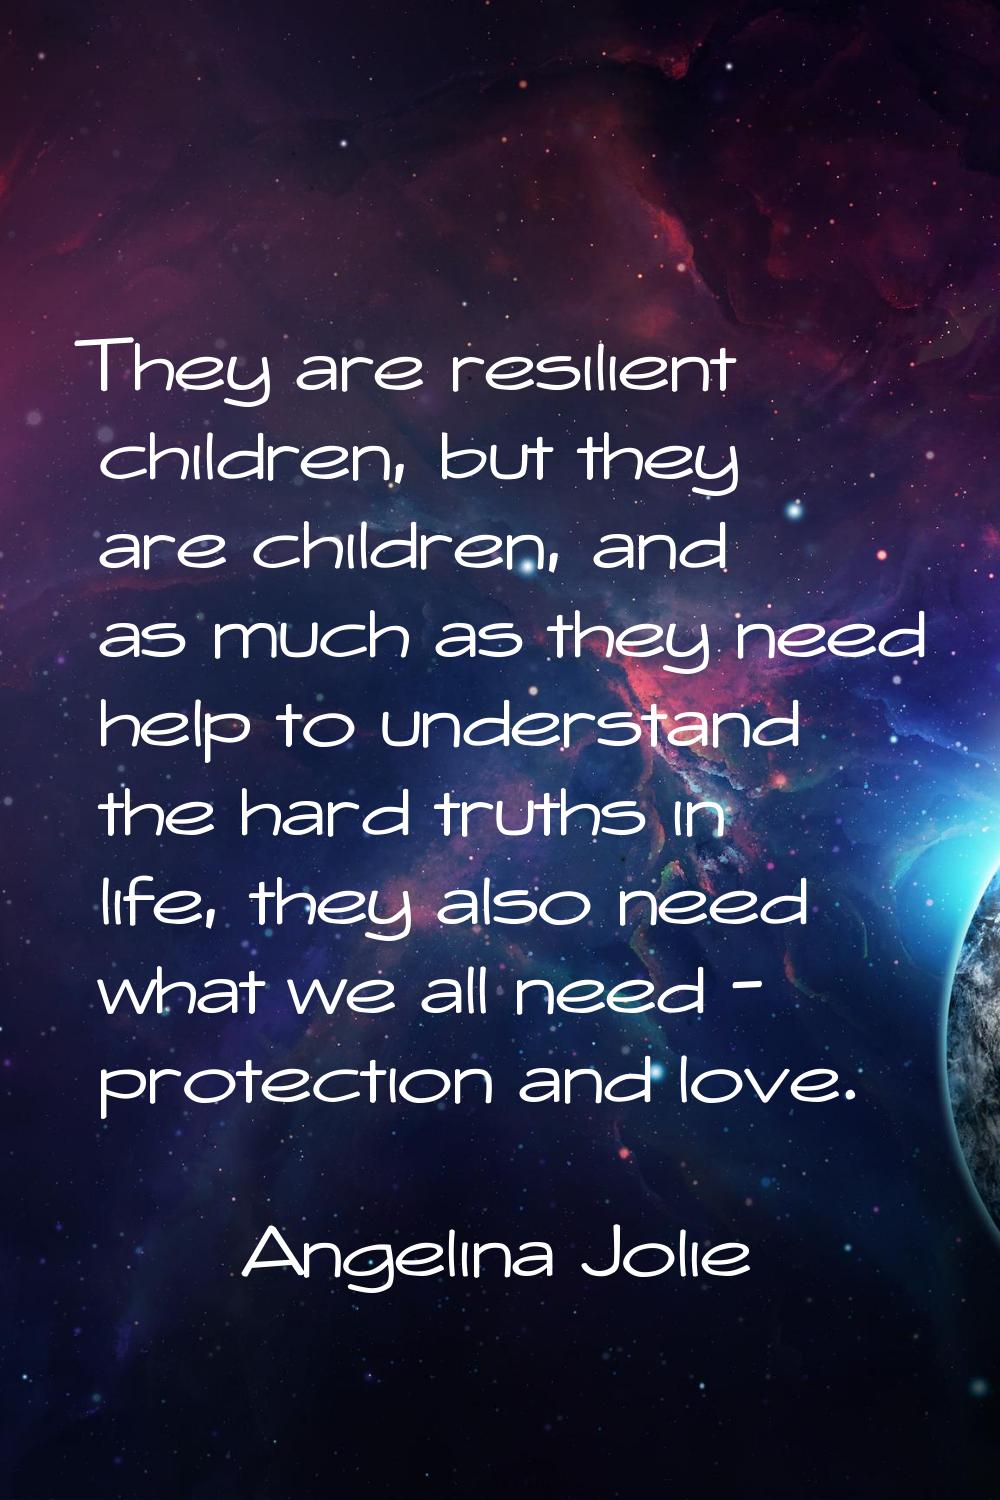 They are resilient children, but they are children, and as much as they need help to understand the